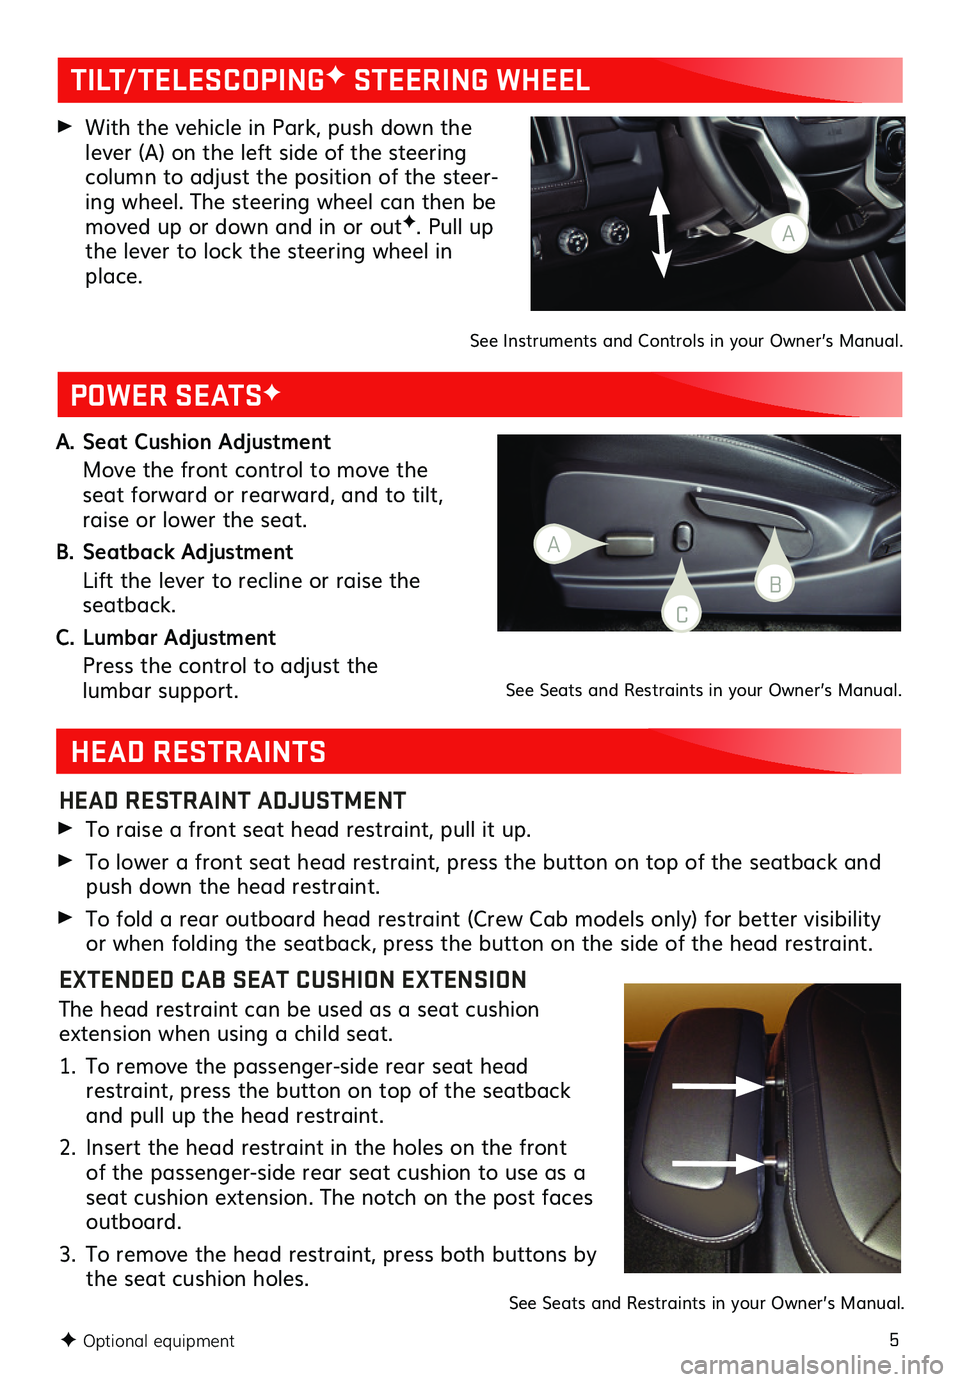 GMC CANYON 2020  Get To Know Guide 5
A. Seat Cushion Adjustment
 Move the front control to move the seat forward or rearward, and to tilt, raise or lower the seat.
B. Seatback Adjustment
 Lift the lever to recline or raise the  seatbac